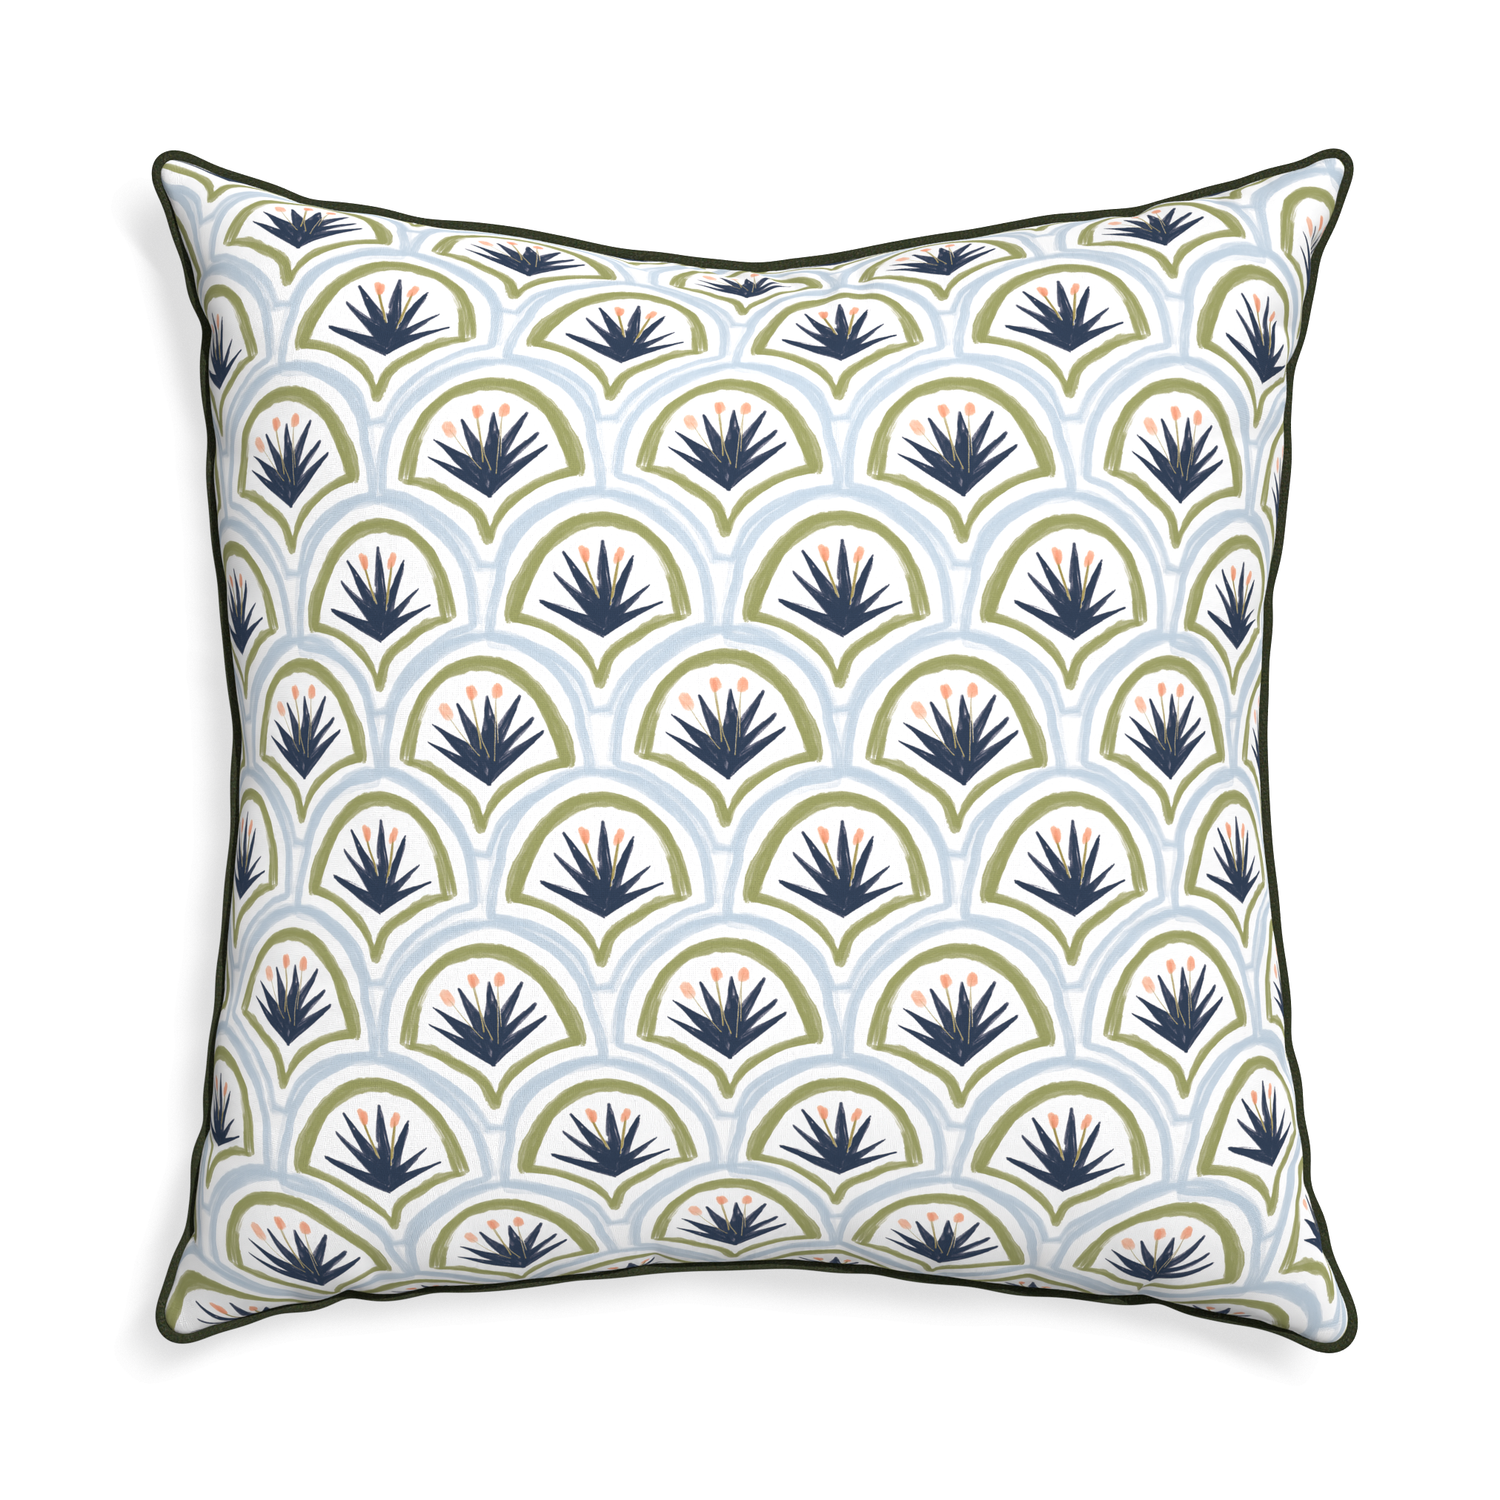 Euro-sham thatcher midnight custom art deco palm patternpillow with f piping on white background